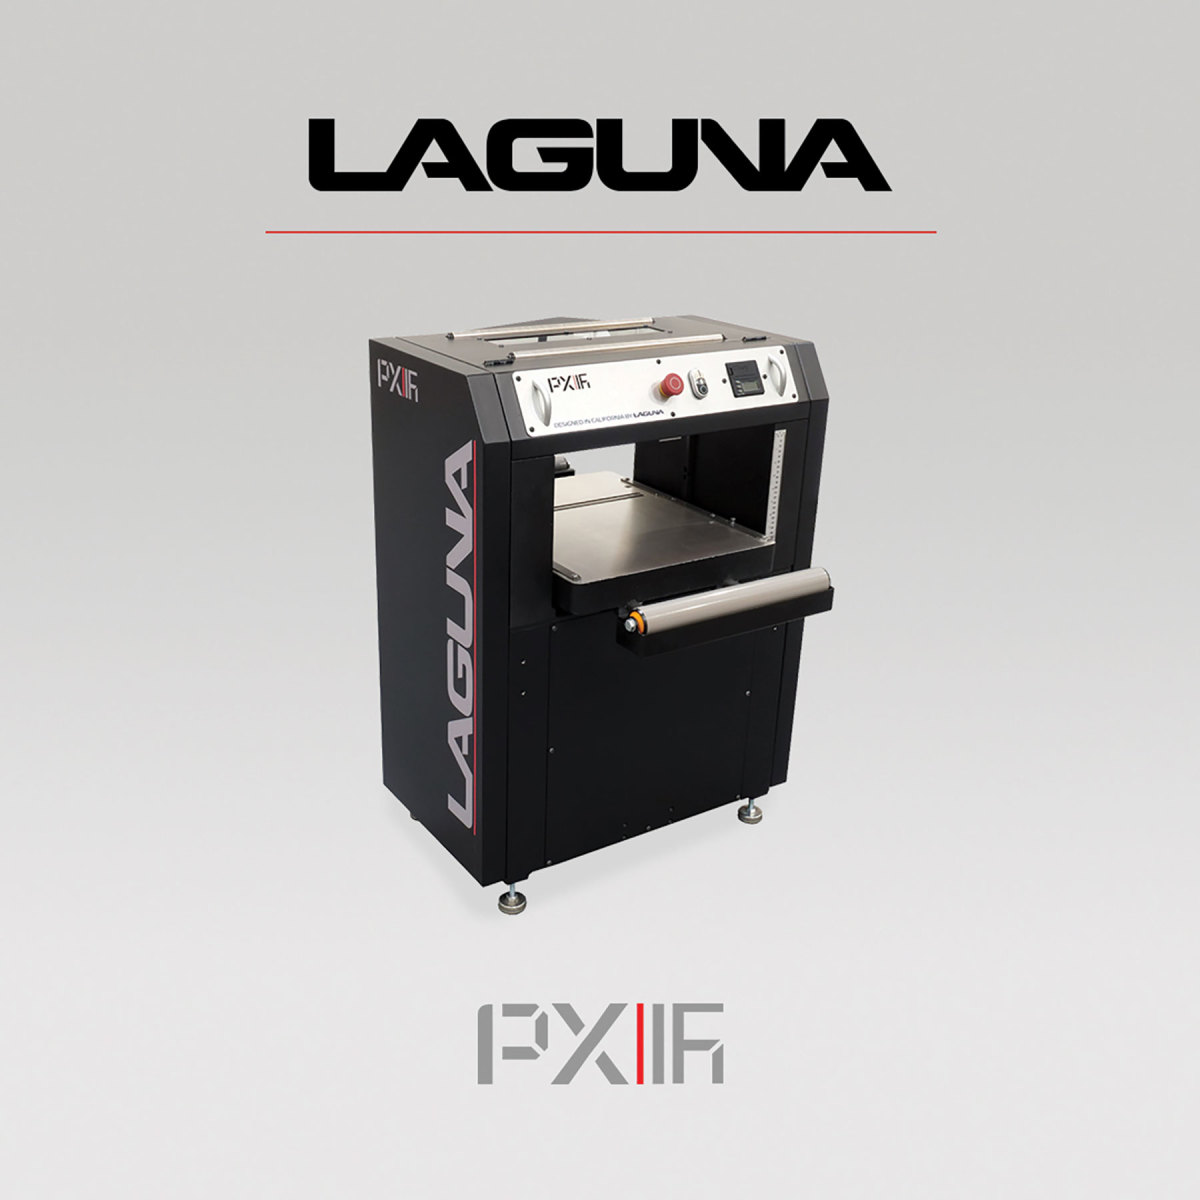 Two models from Laguna’s extensive planer and jointer introductions.